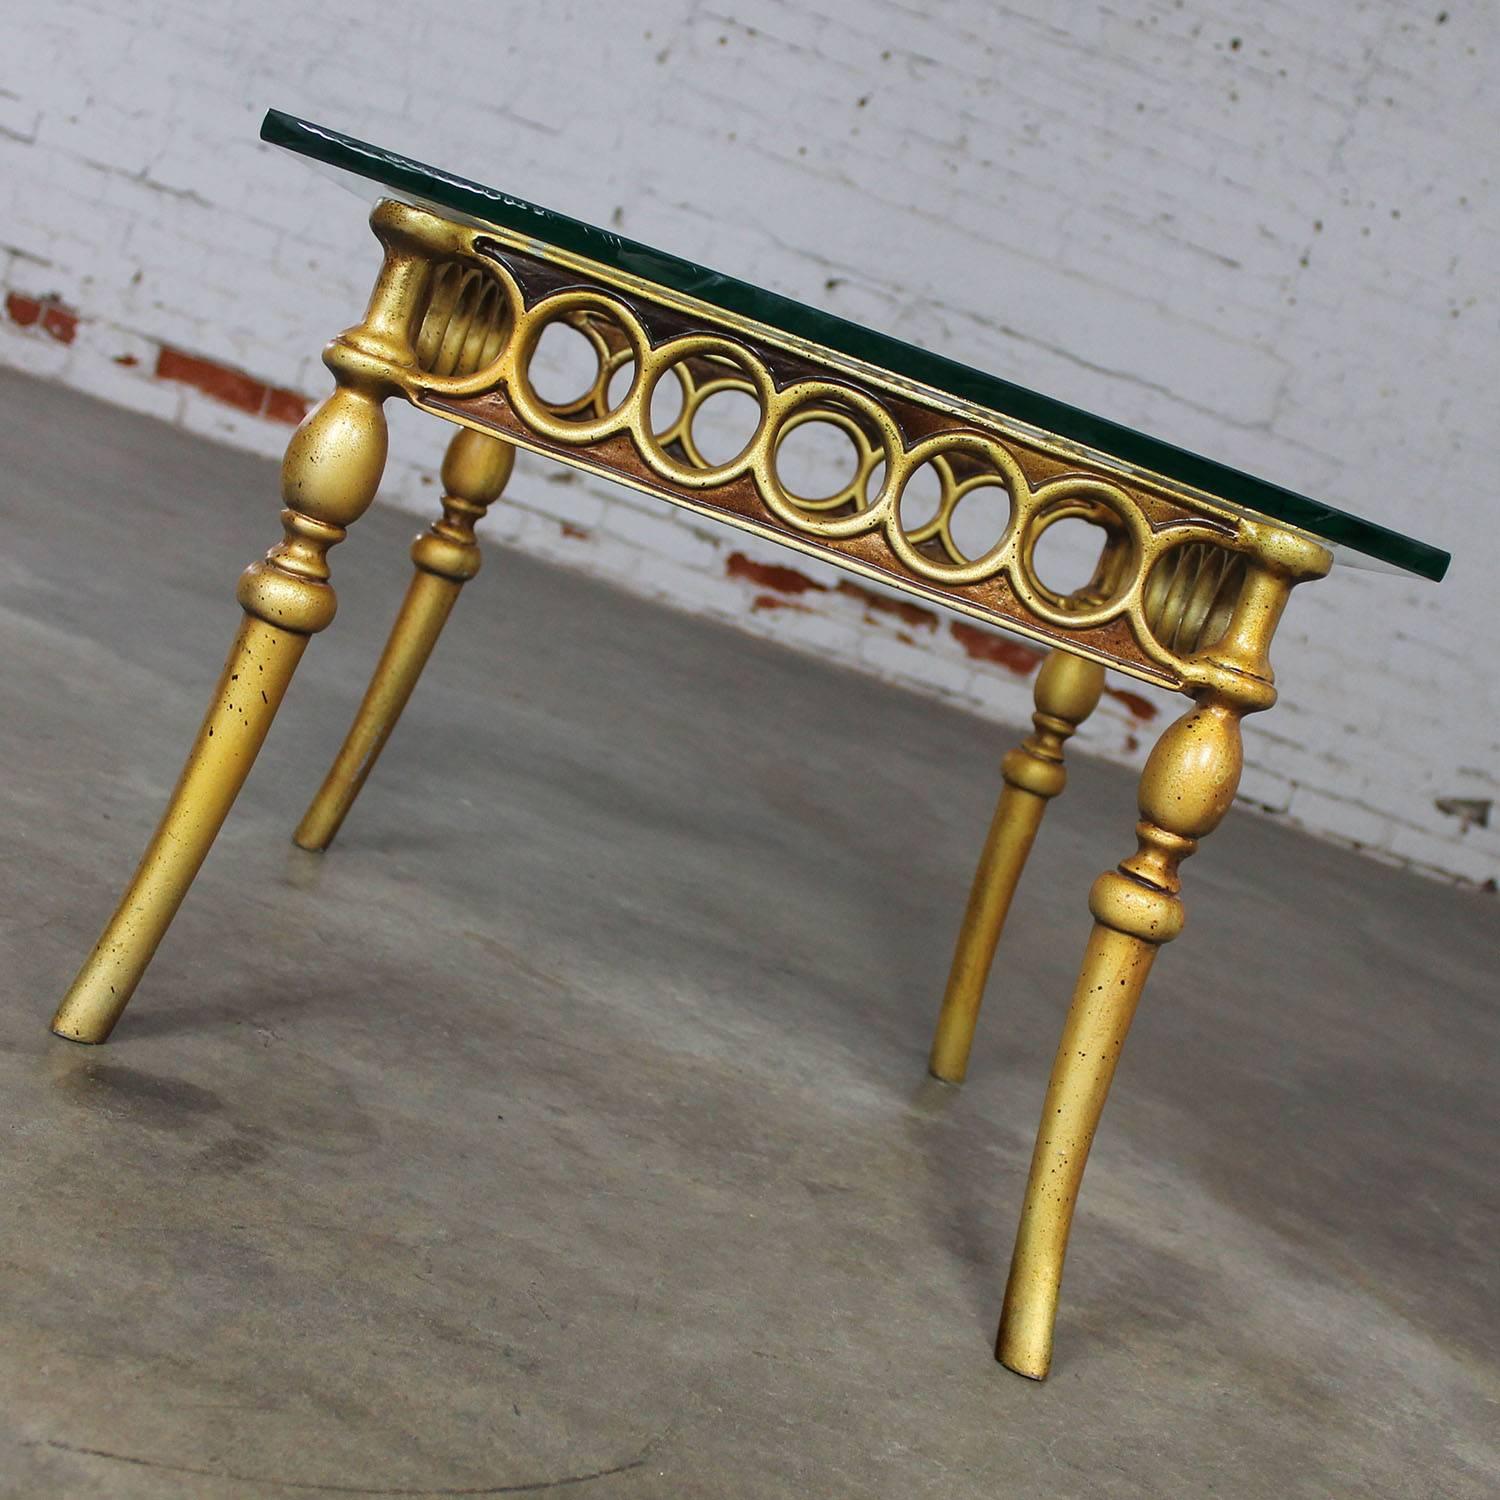 Wonderful little Hollywood Regency or Art Deco styled side or end table with glass topped base of gilded cast aluminum construction and fabulous, circa 1970s condition.

This is quite the awesome little accent table! Hollywood Regency or Art Deco